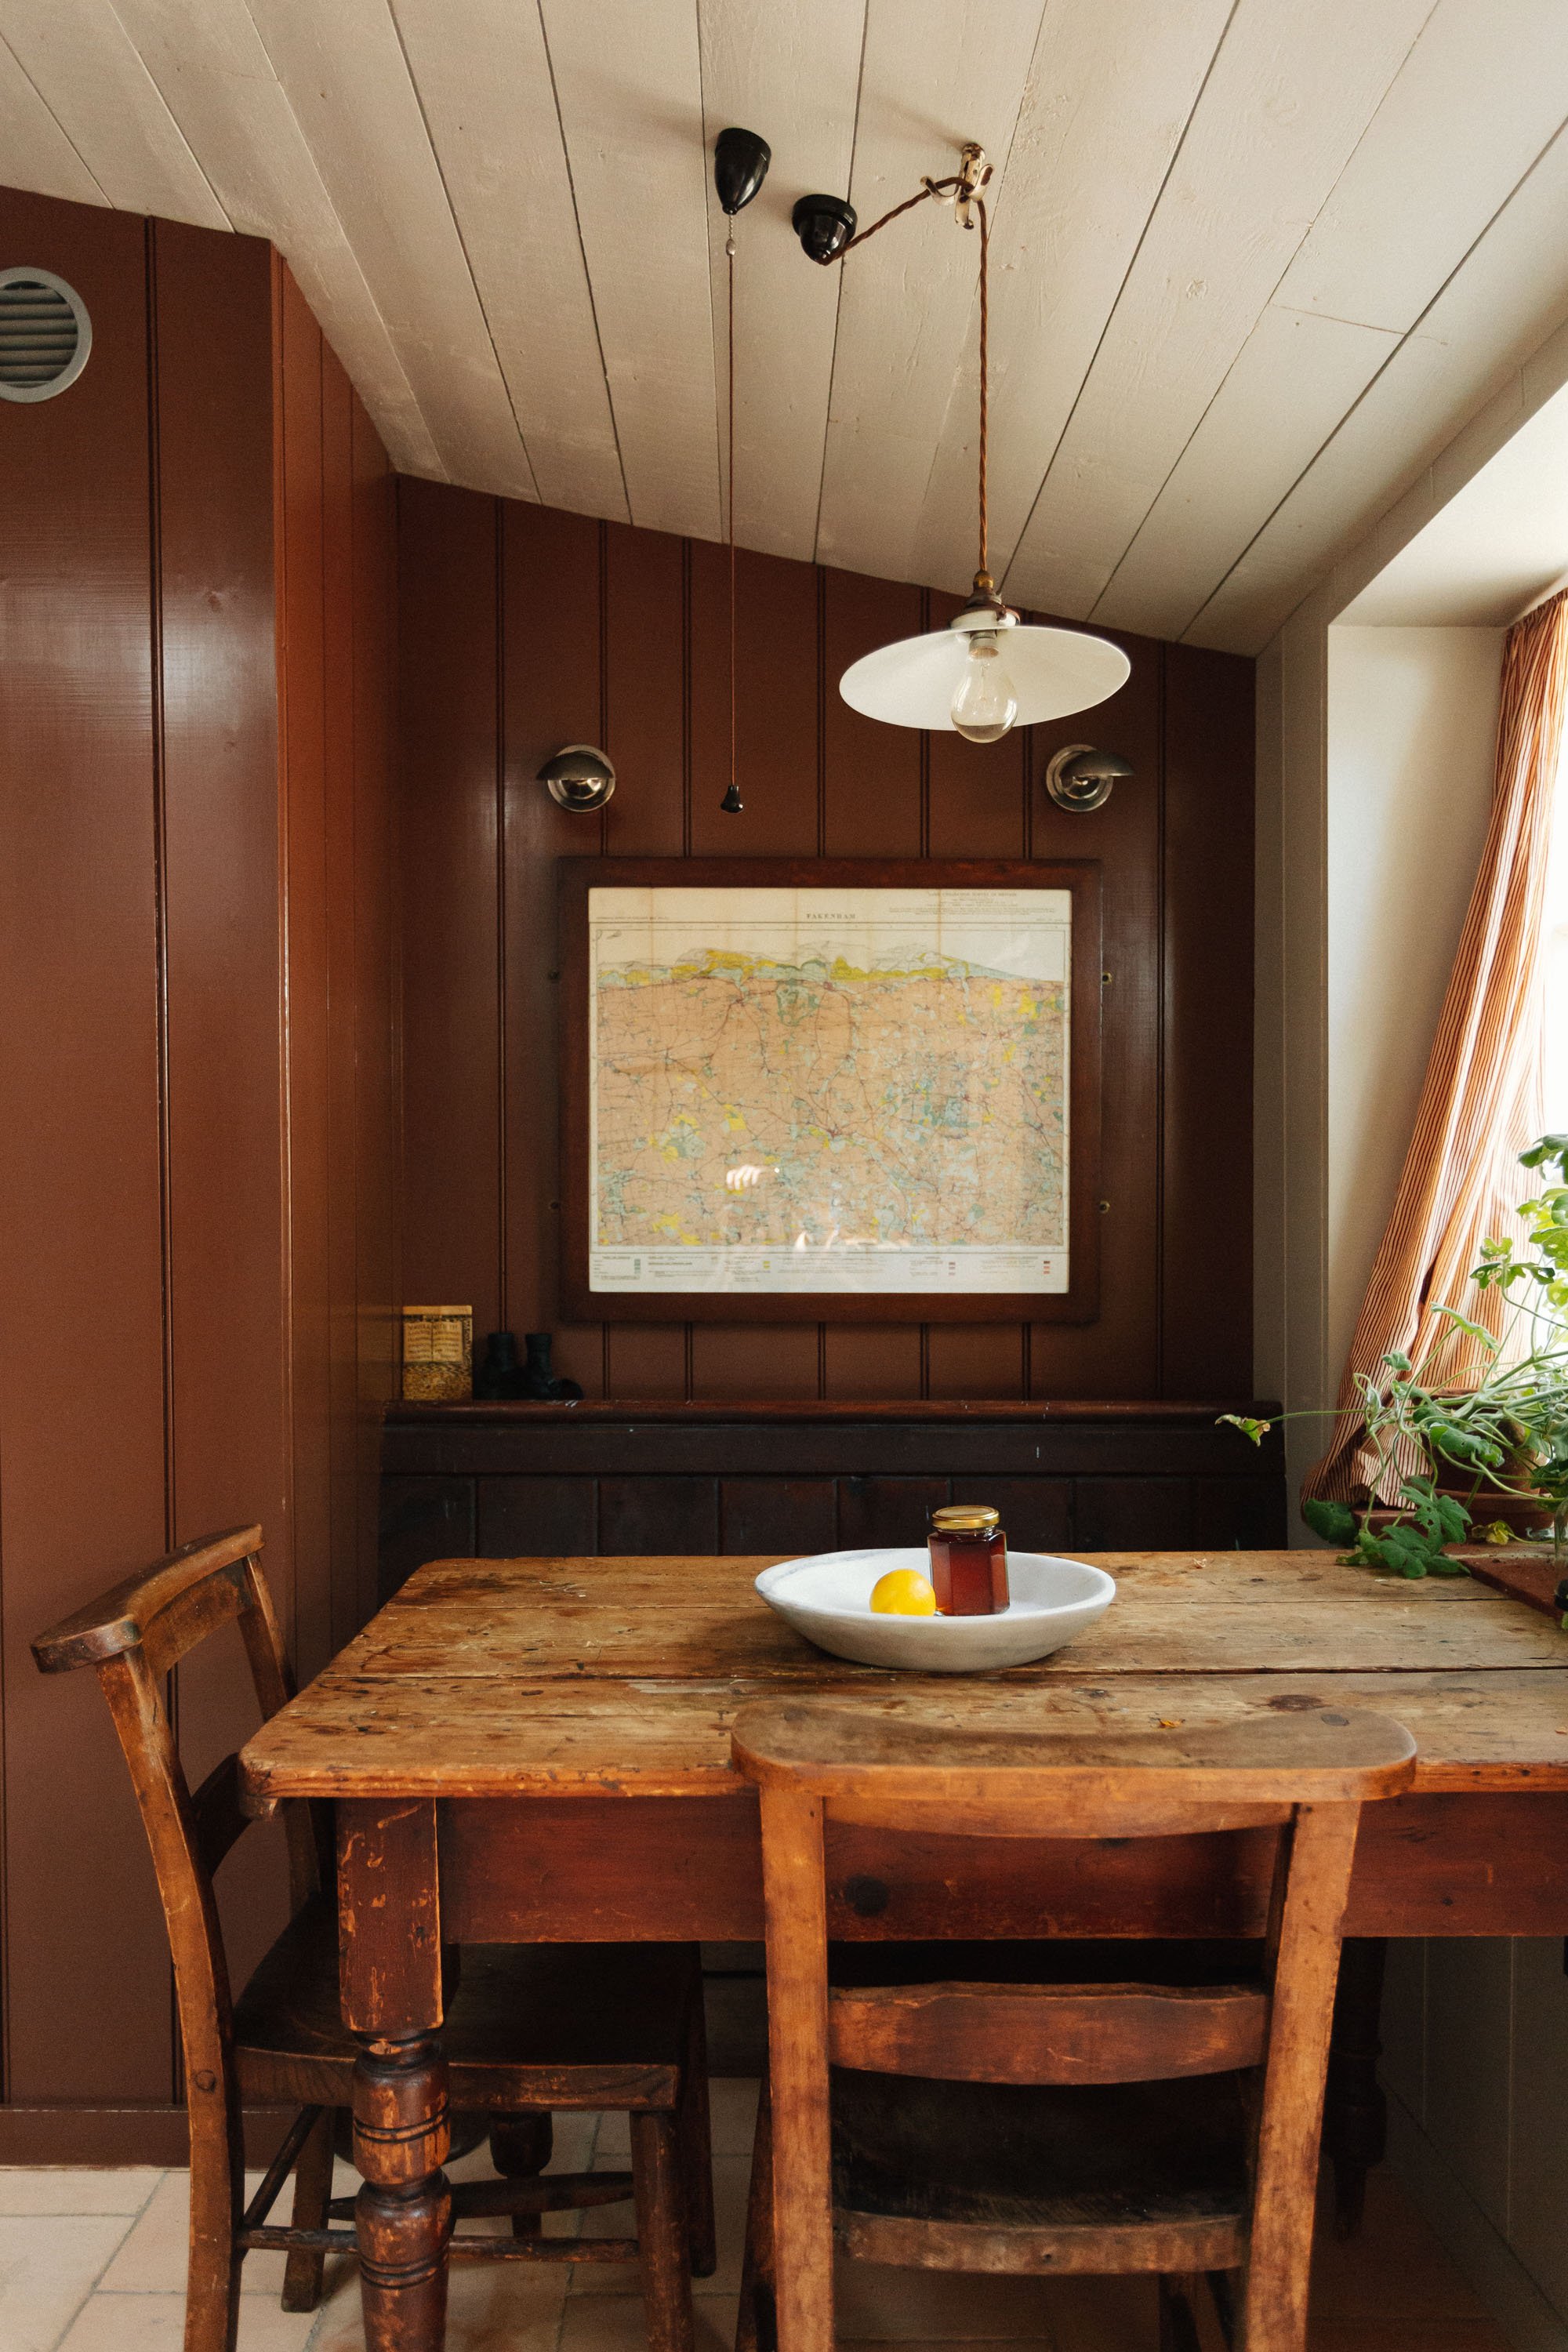 Cosy kitchen table nook with wood clad walls painted in brown